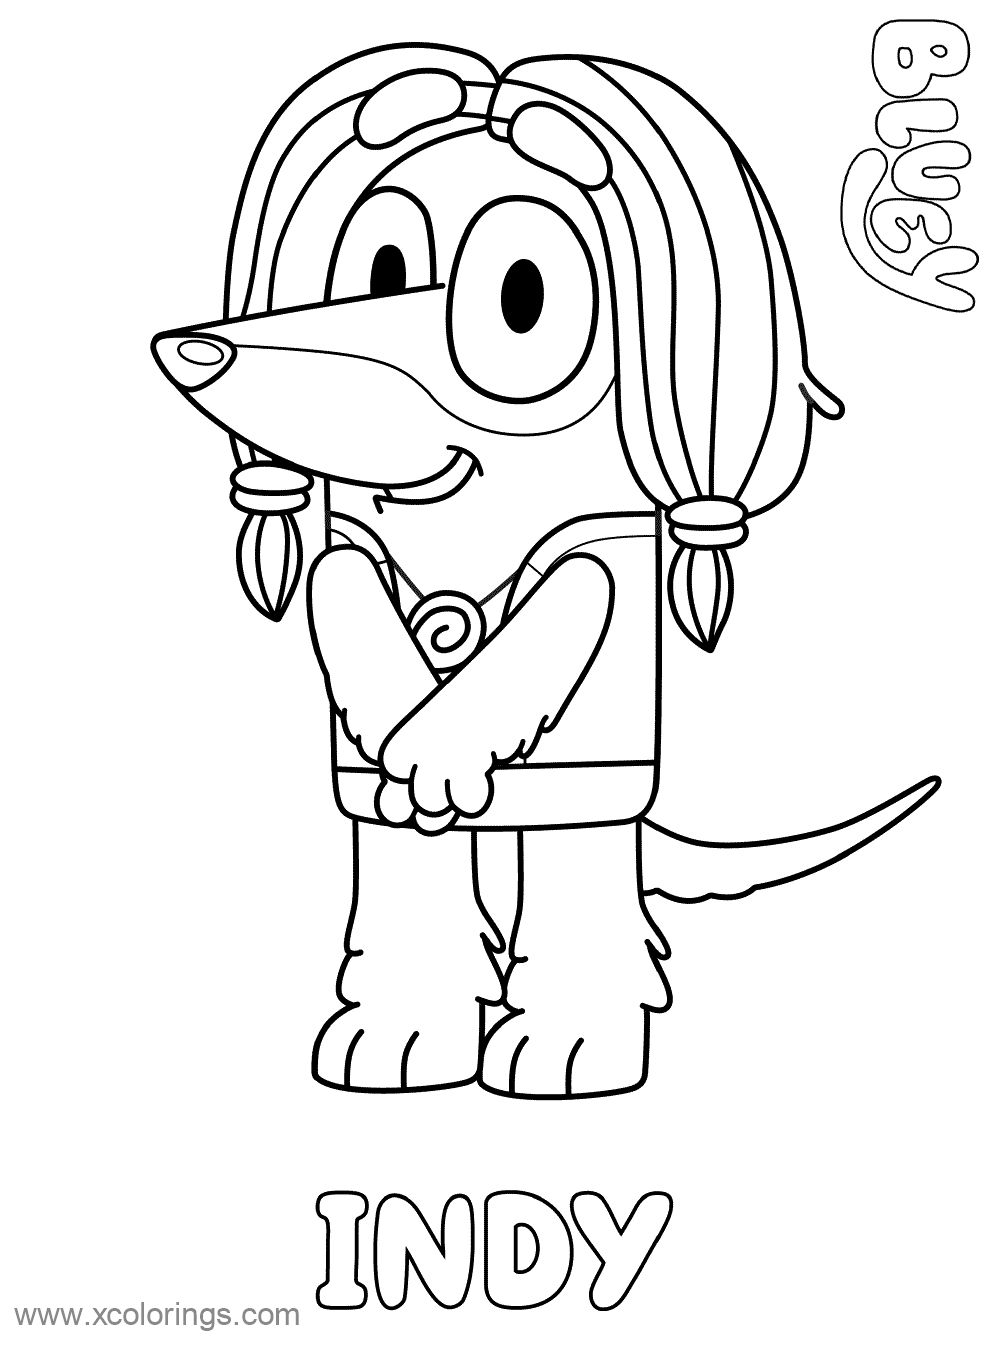 Free Indy from Bluey Coloring Pages printable